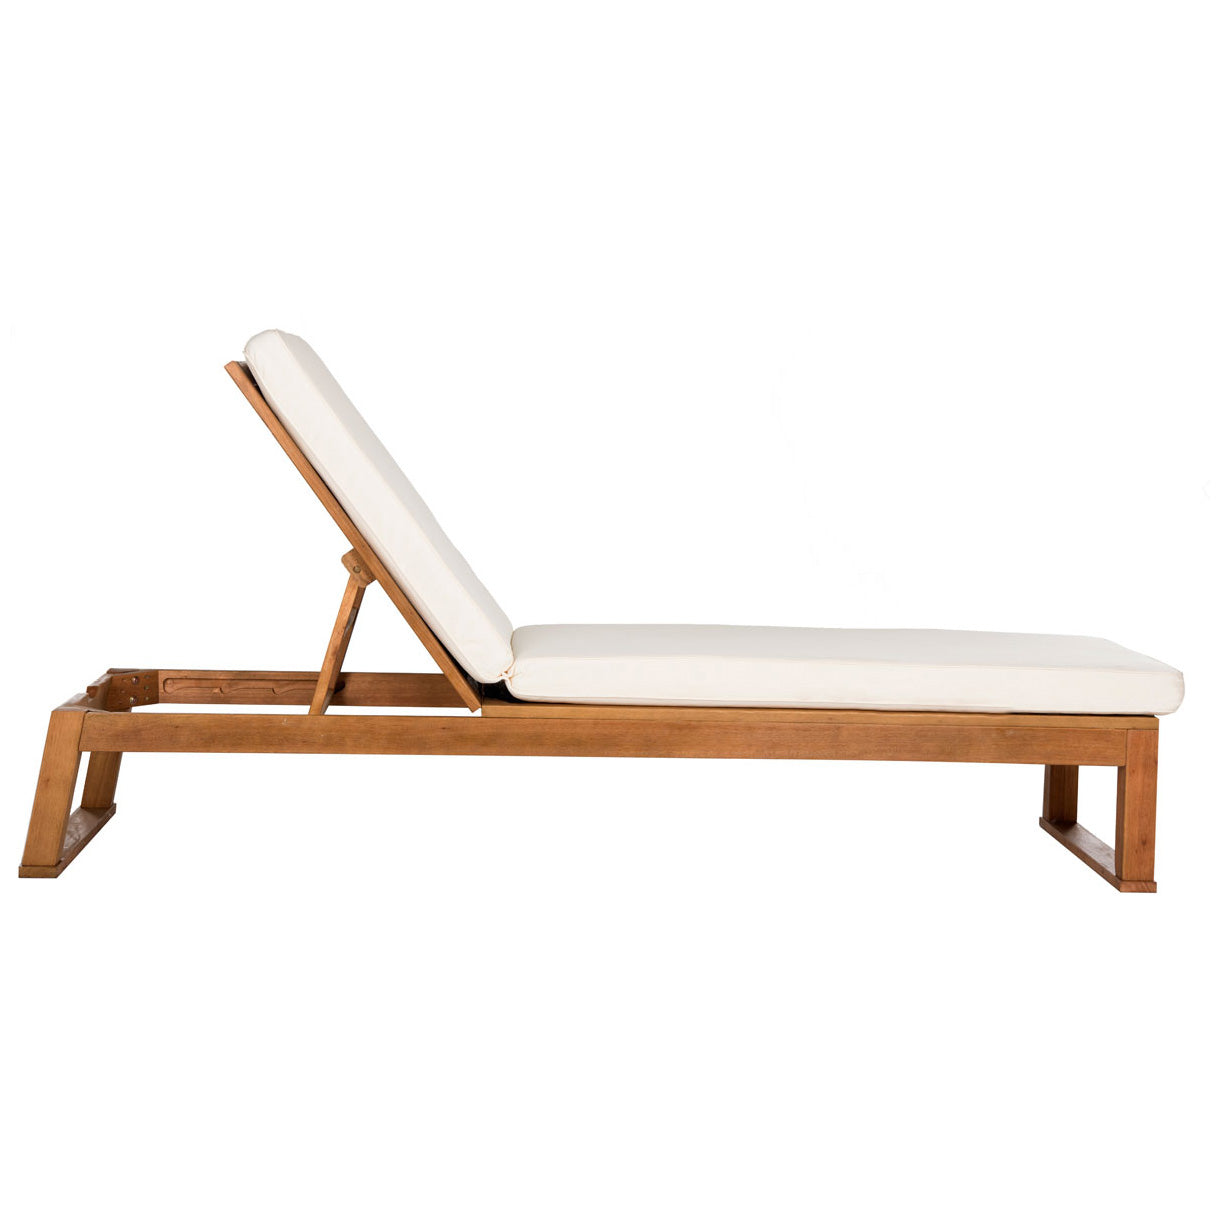 Isobel Outdoor Chaise Lounge – Paynes Gray